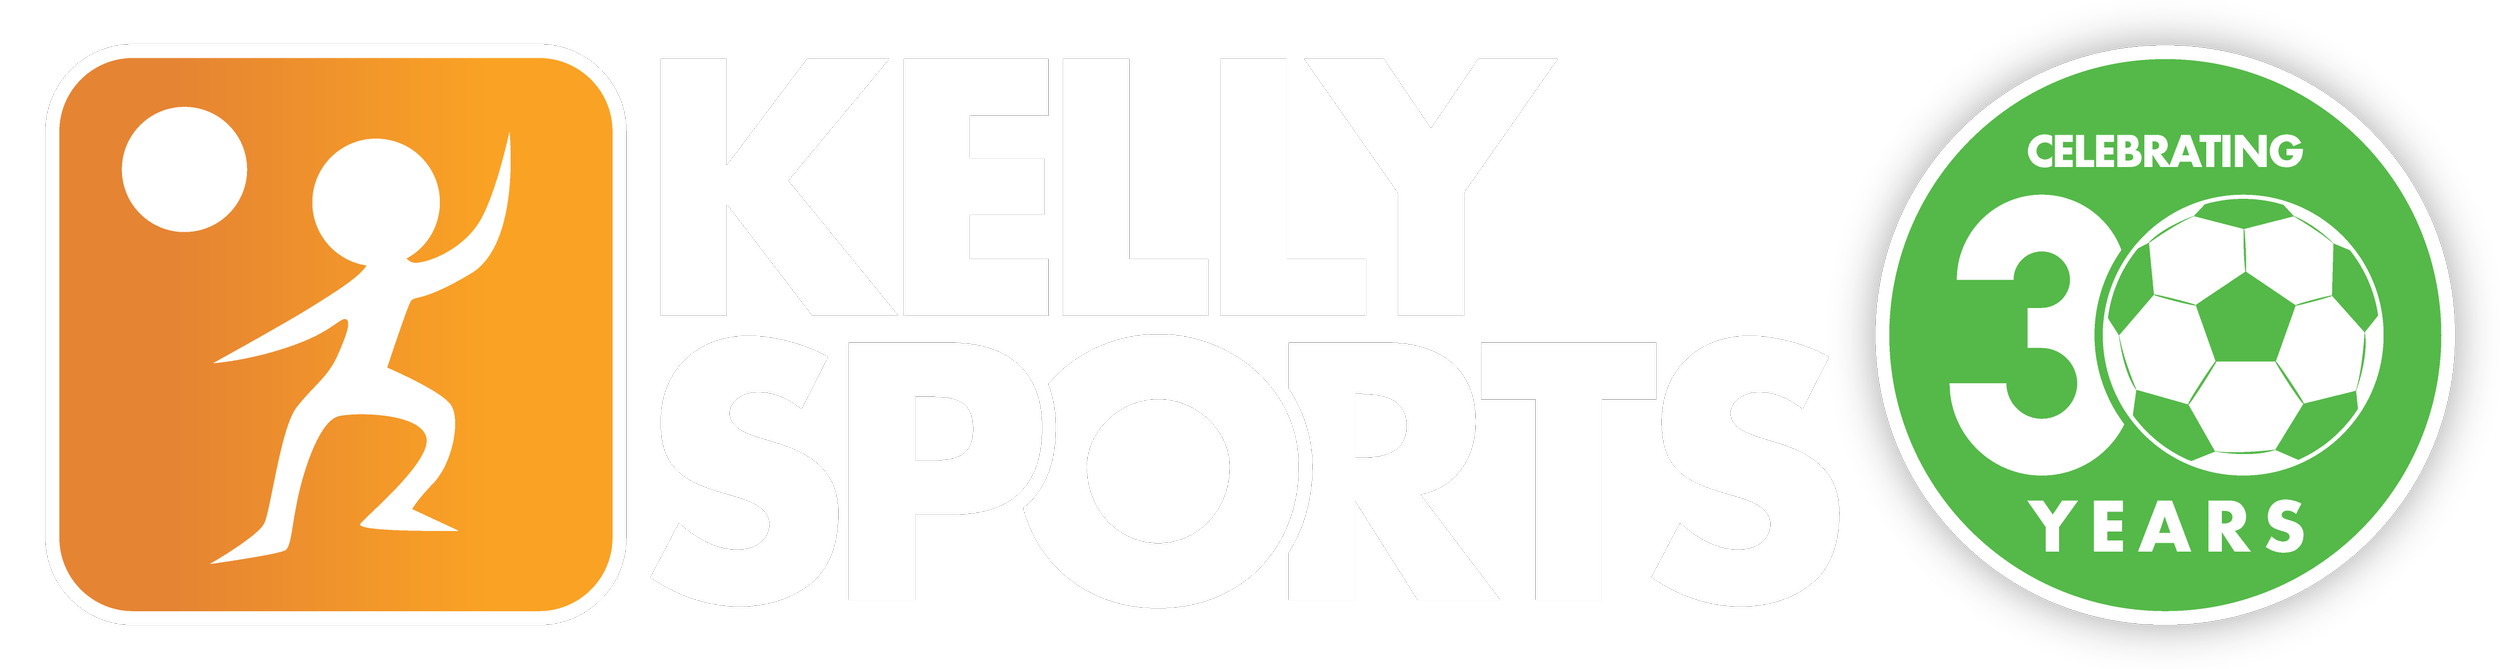 Kelly Sports Australia - A guide for Events